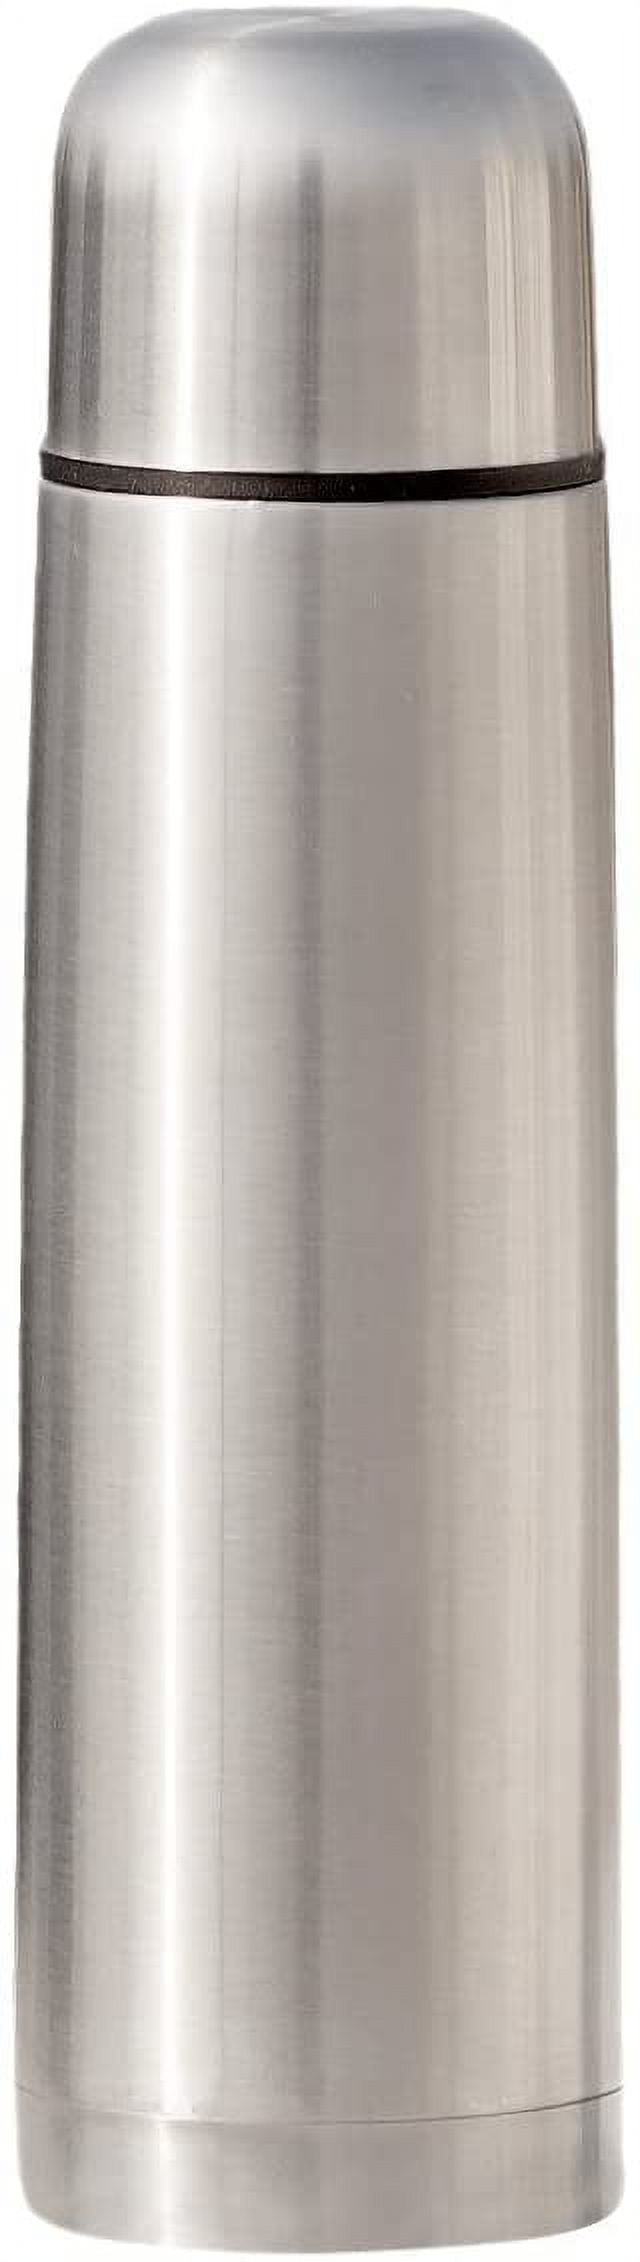 Best Stainless Steel Coffee Thermos, BPA Free, New Triple Wall